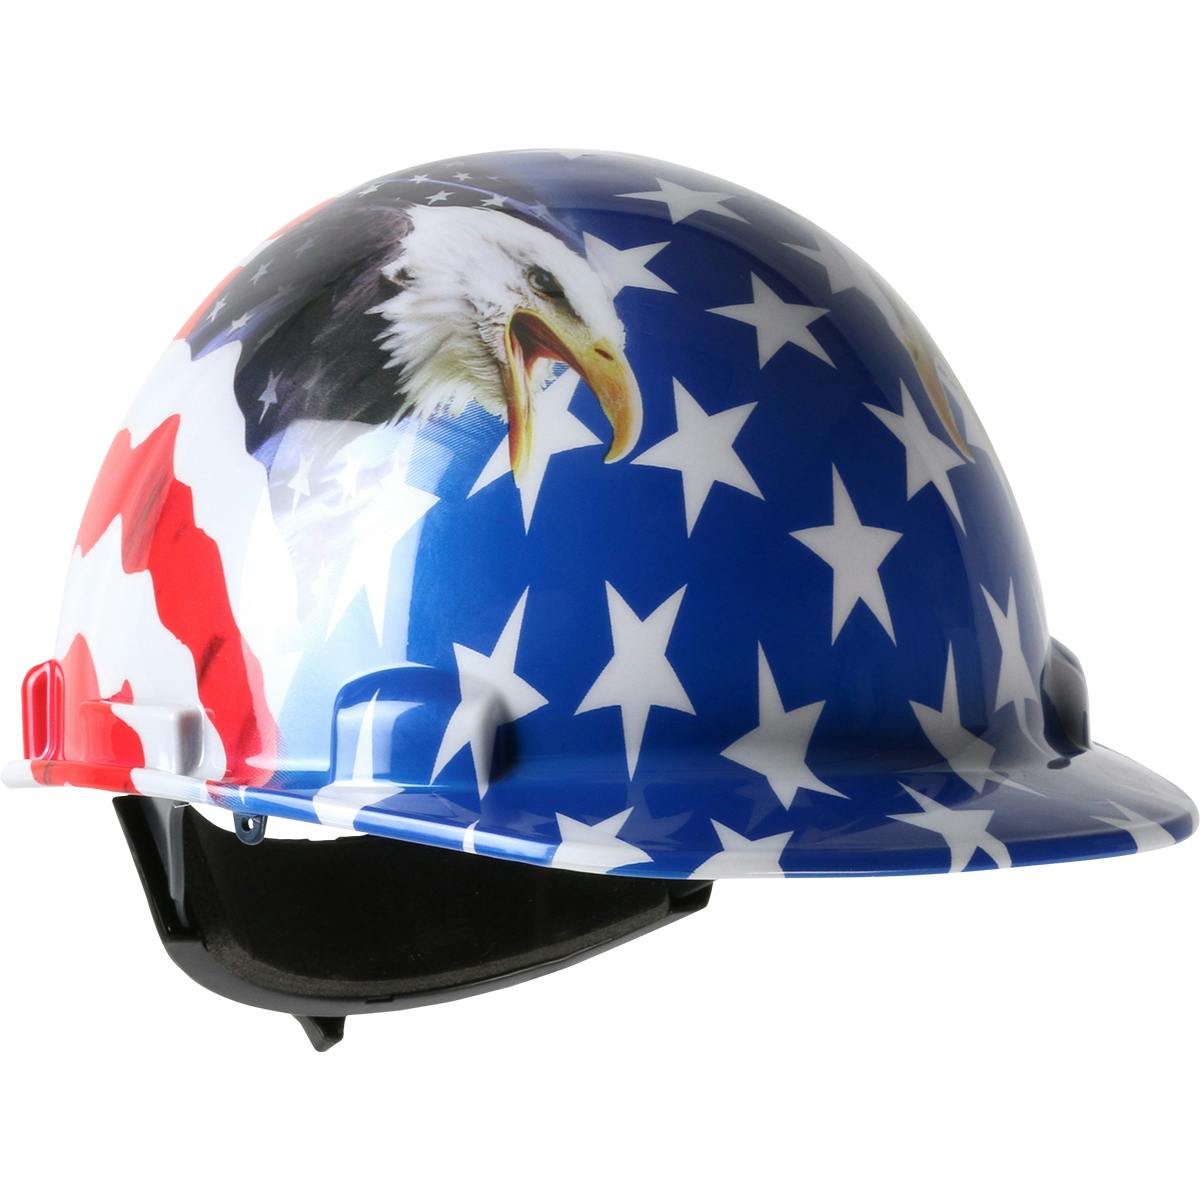 Cap Style Smooth Dome Hard Hat with HDPE Shell, 4-Point Textile Suspension, Graphic Wrap and Wheel-Ratchet Adjustment, Navy (280-HP341R-USA) - OS_1